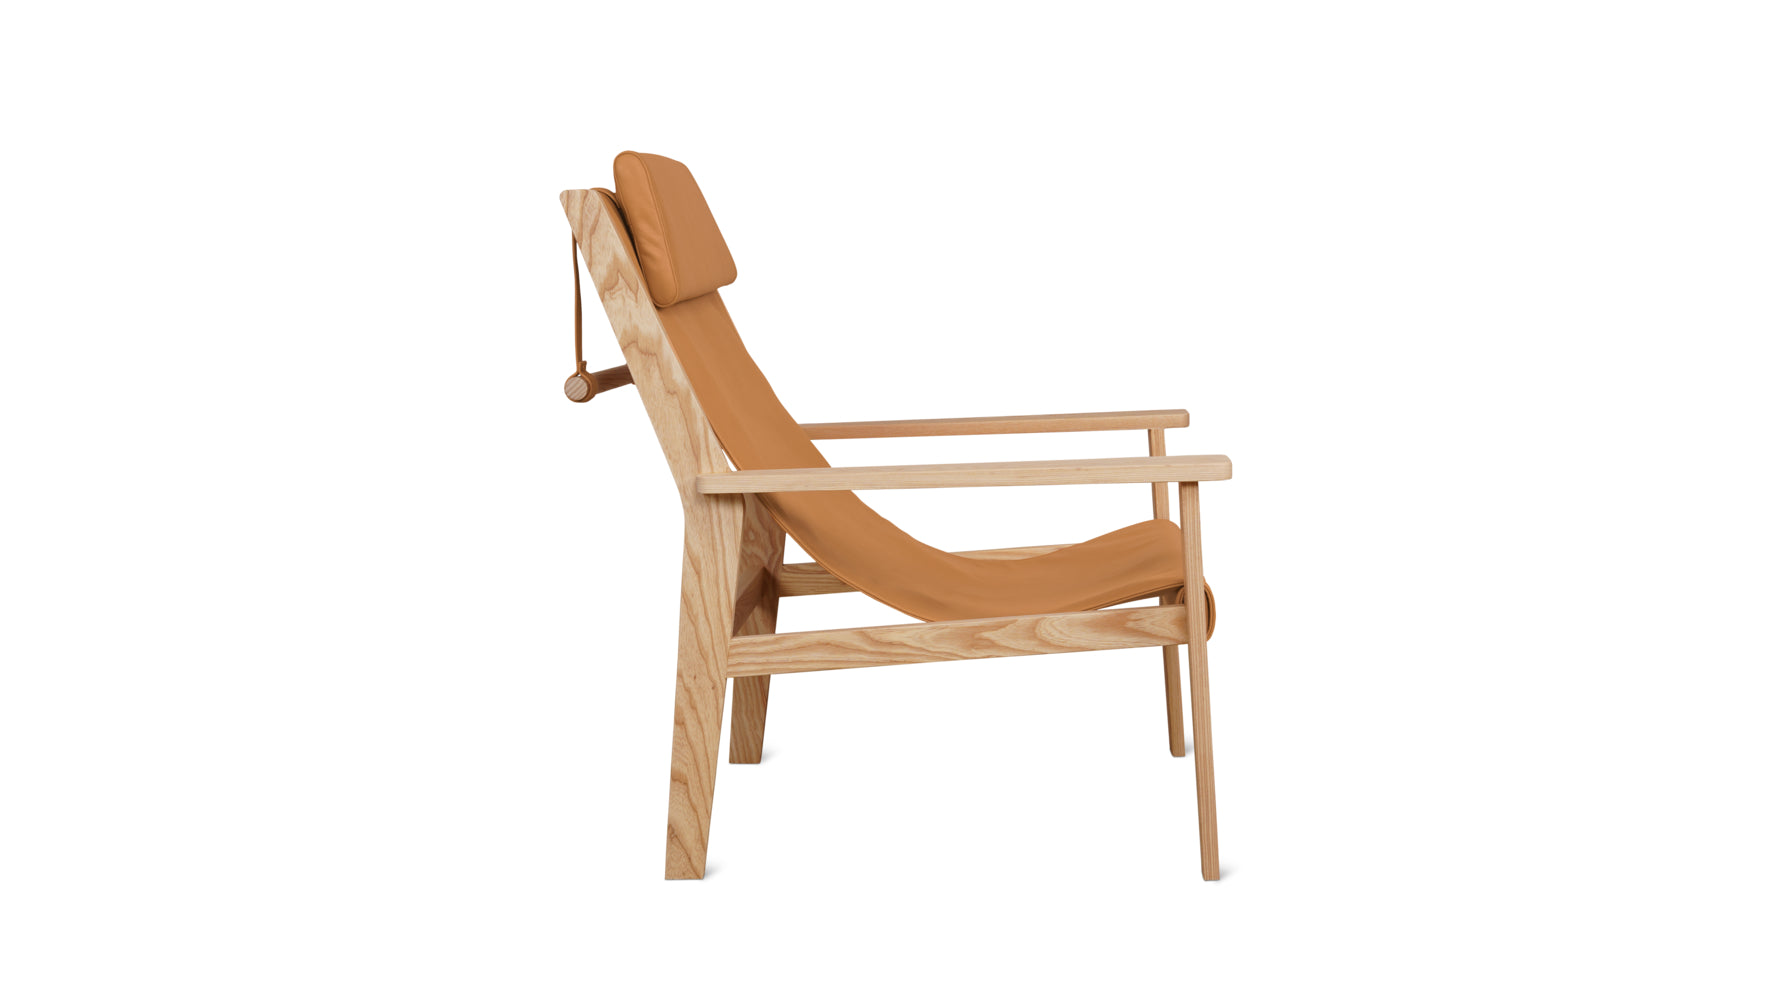 Sweet Life Sling Lounge Chair With Headrest, Terracotta Ash - Image 4